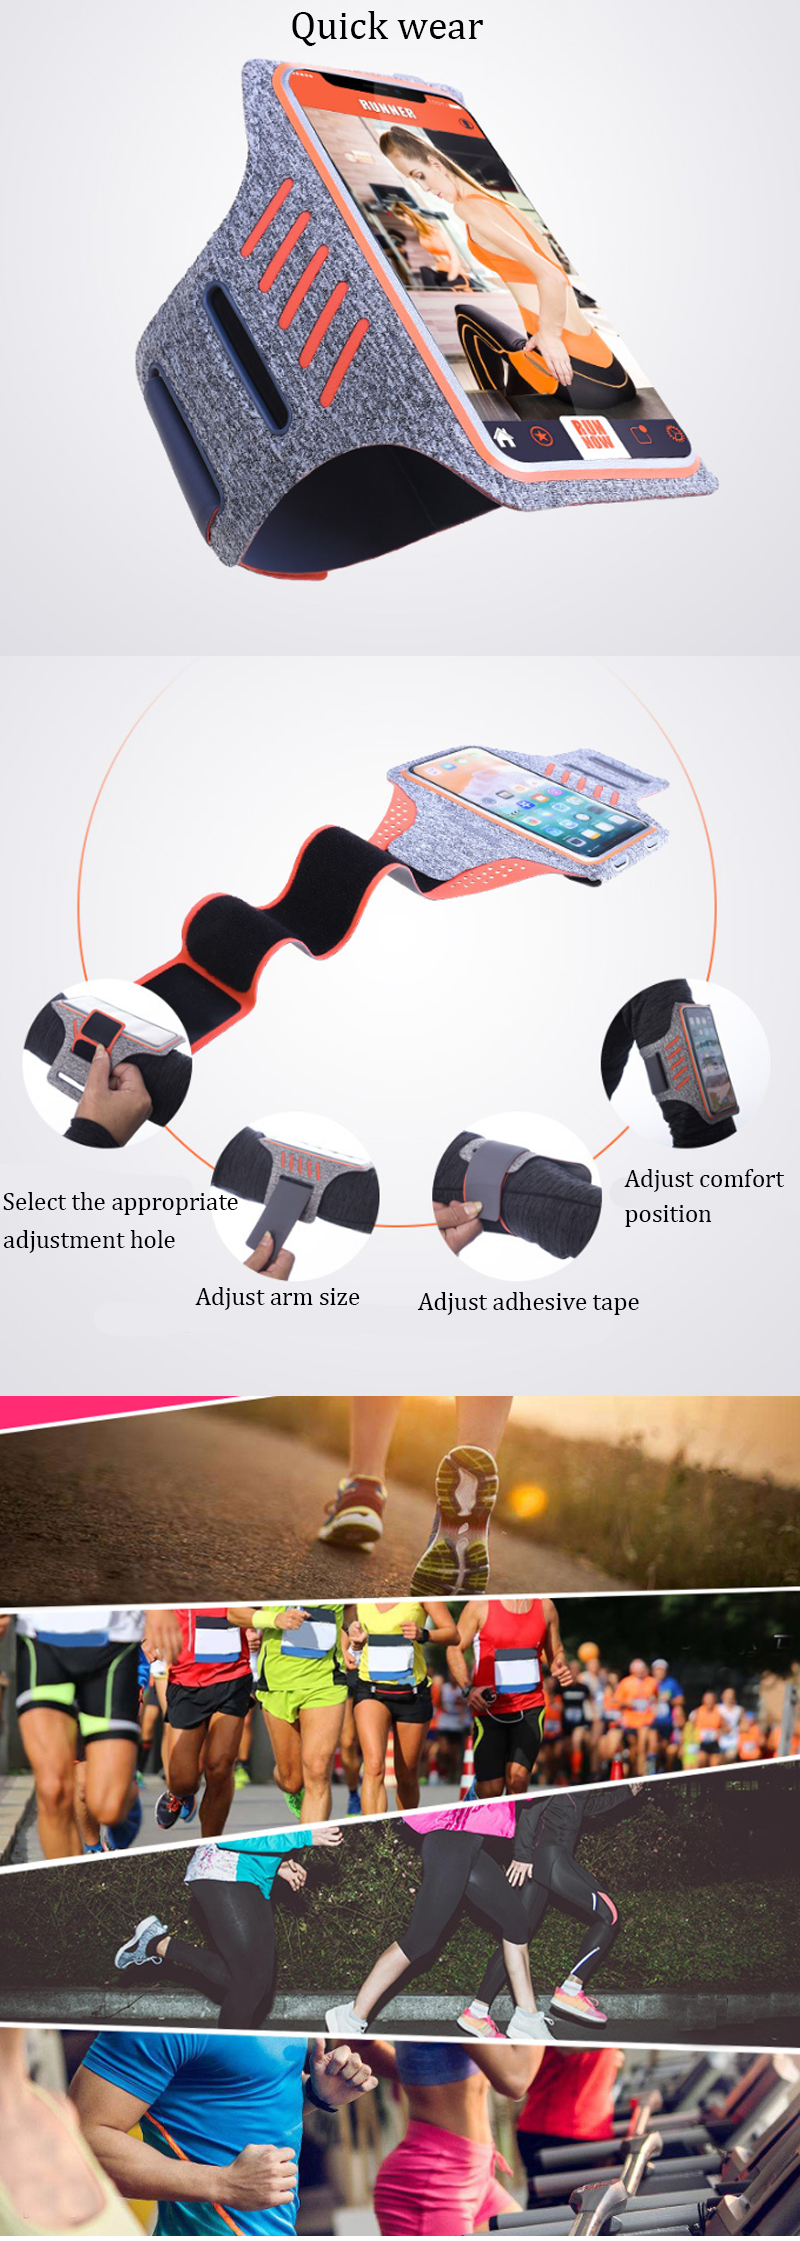 AONIJIE-5-6-inch-Phone-Bag-Arm-Band-Waterproof-Fitness-Running-Riding-Phone-Holder-Pouch-Arm-Bag-1404409